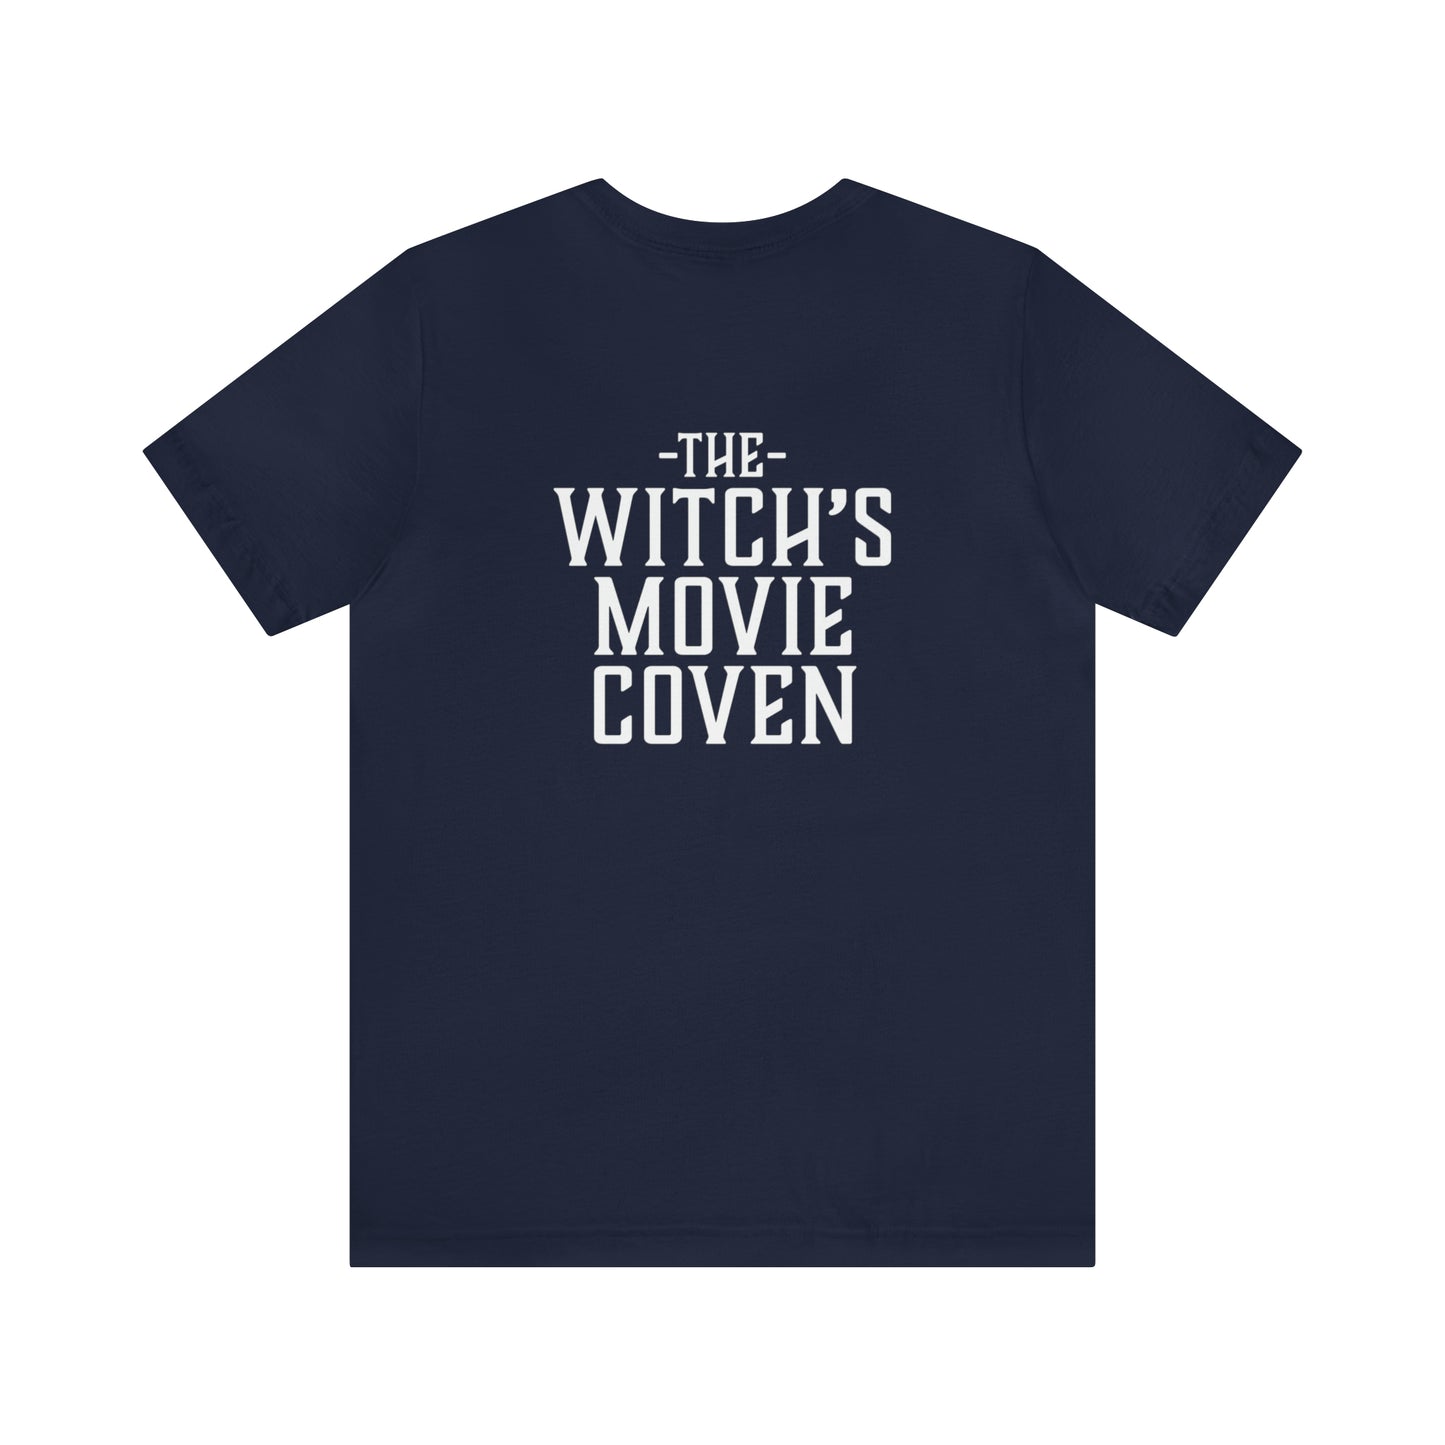 The Witch's Movie Coven Sebastiaan's Quote Unisex Tee